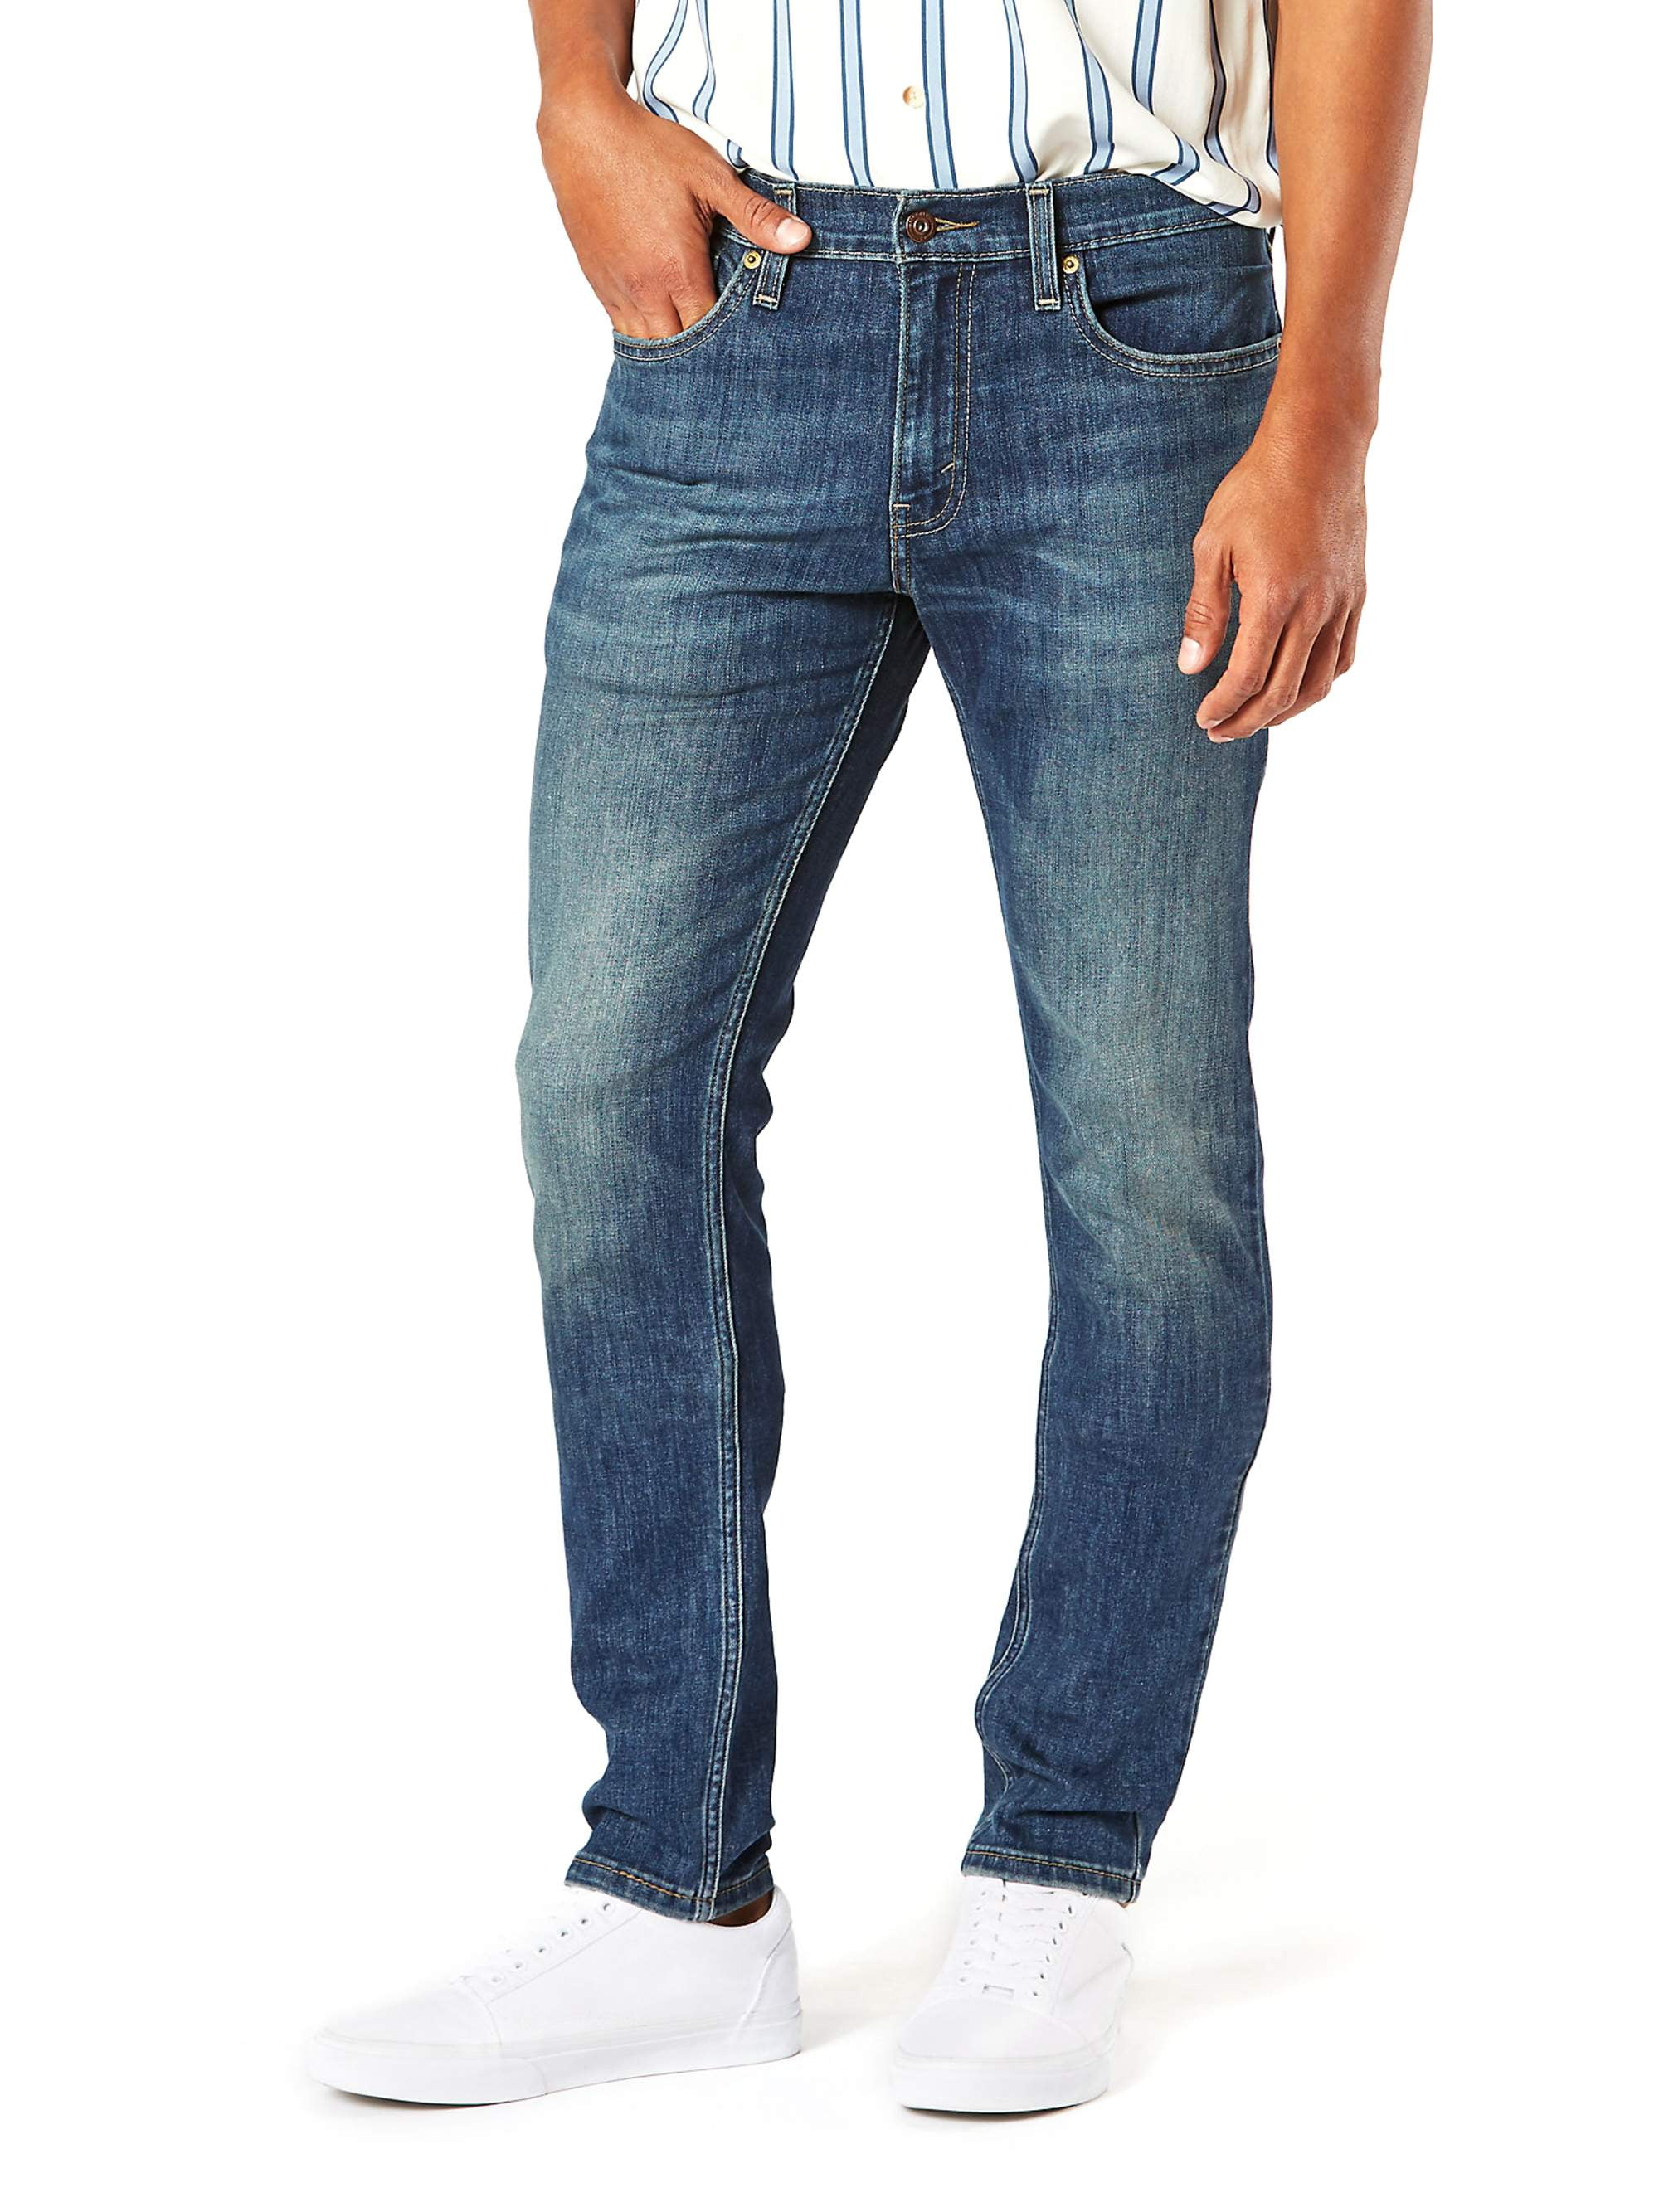 Signature by Levi Strauss & Co. Men\'s Skinny Fit Jeans